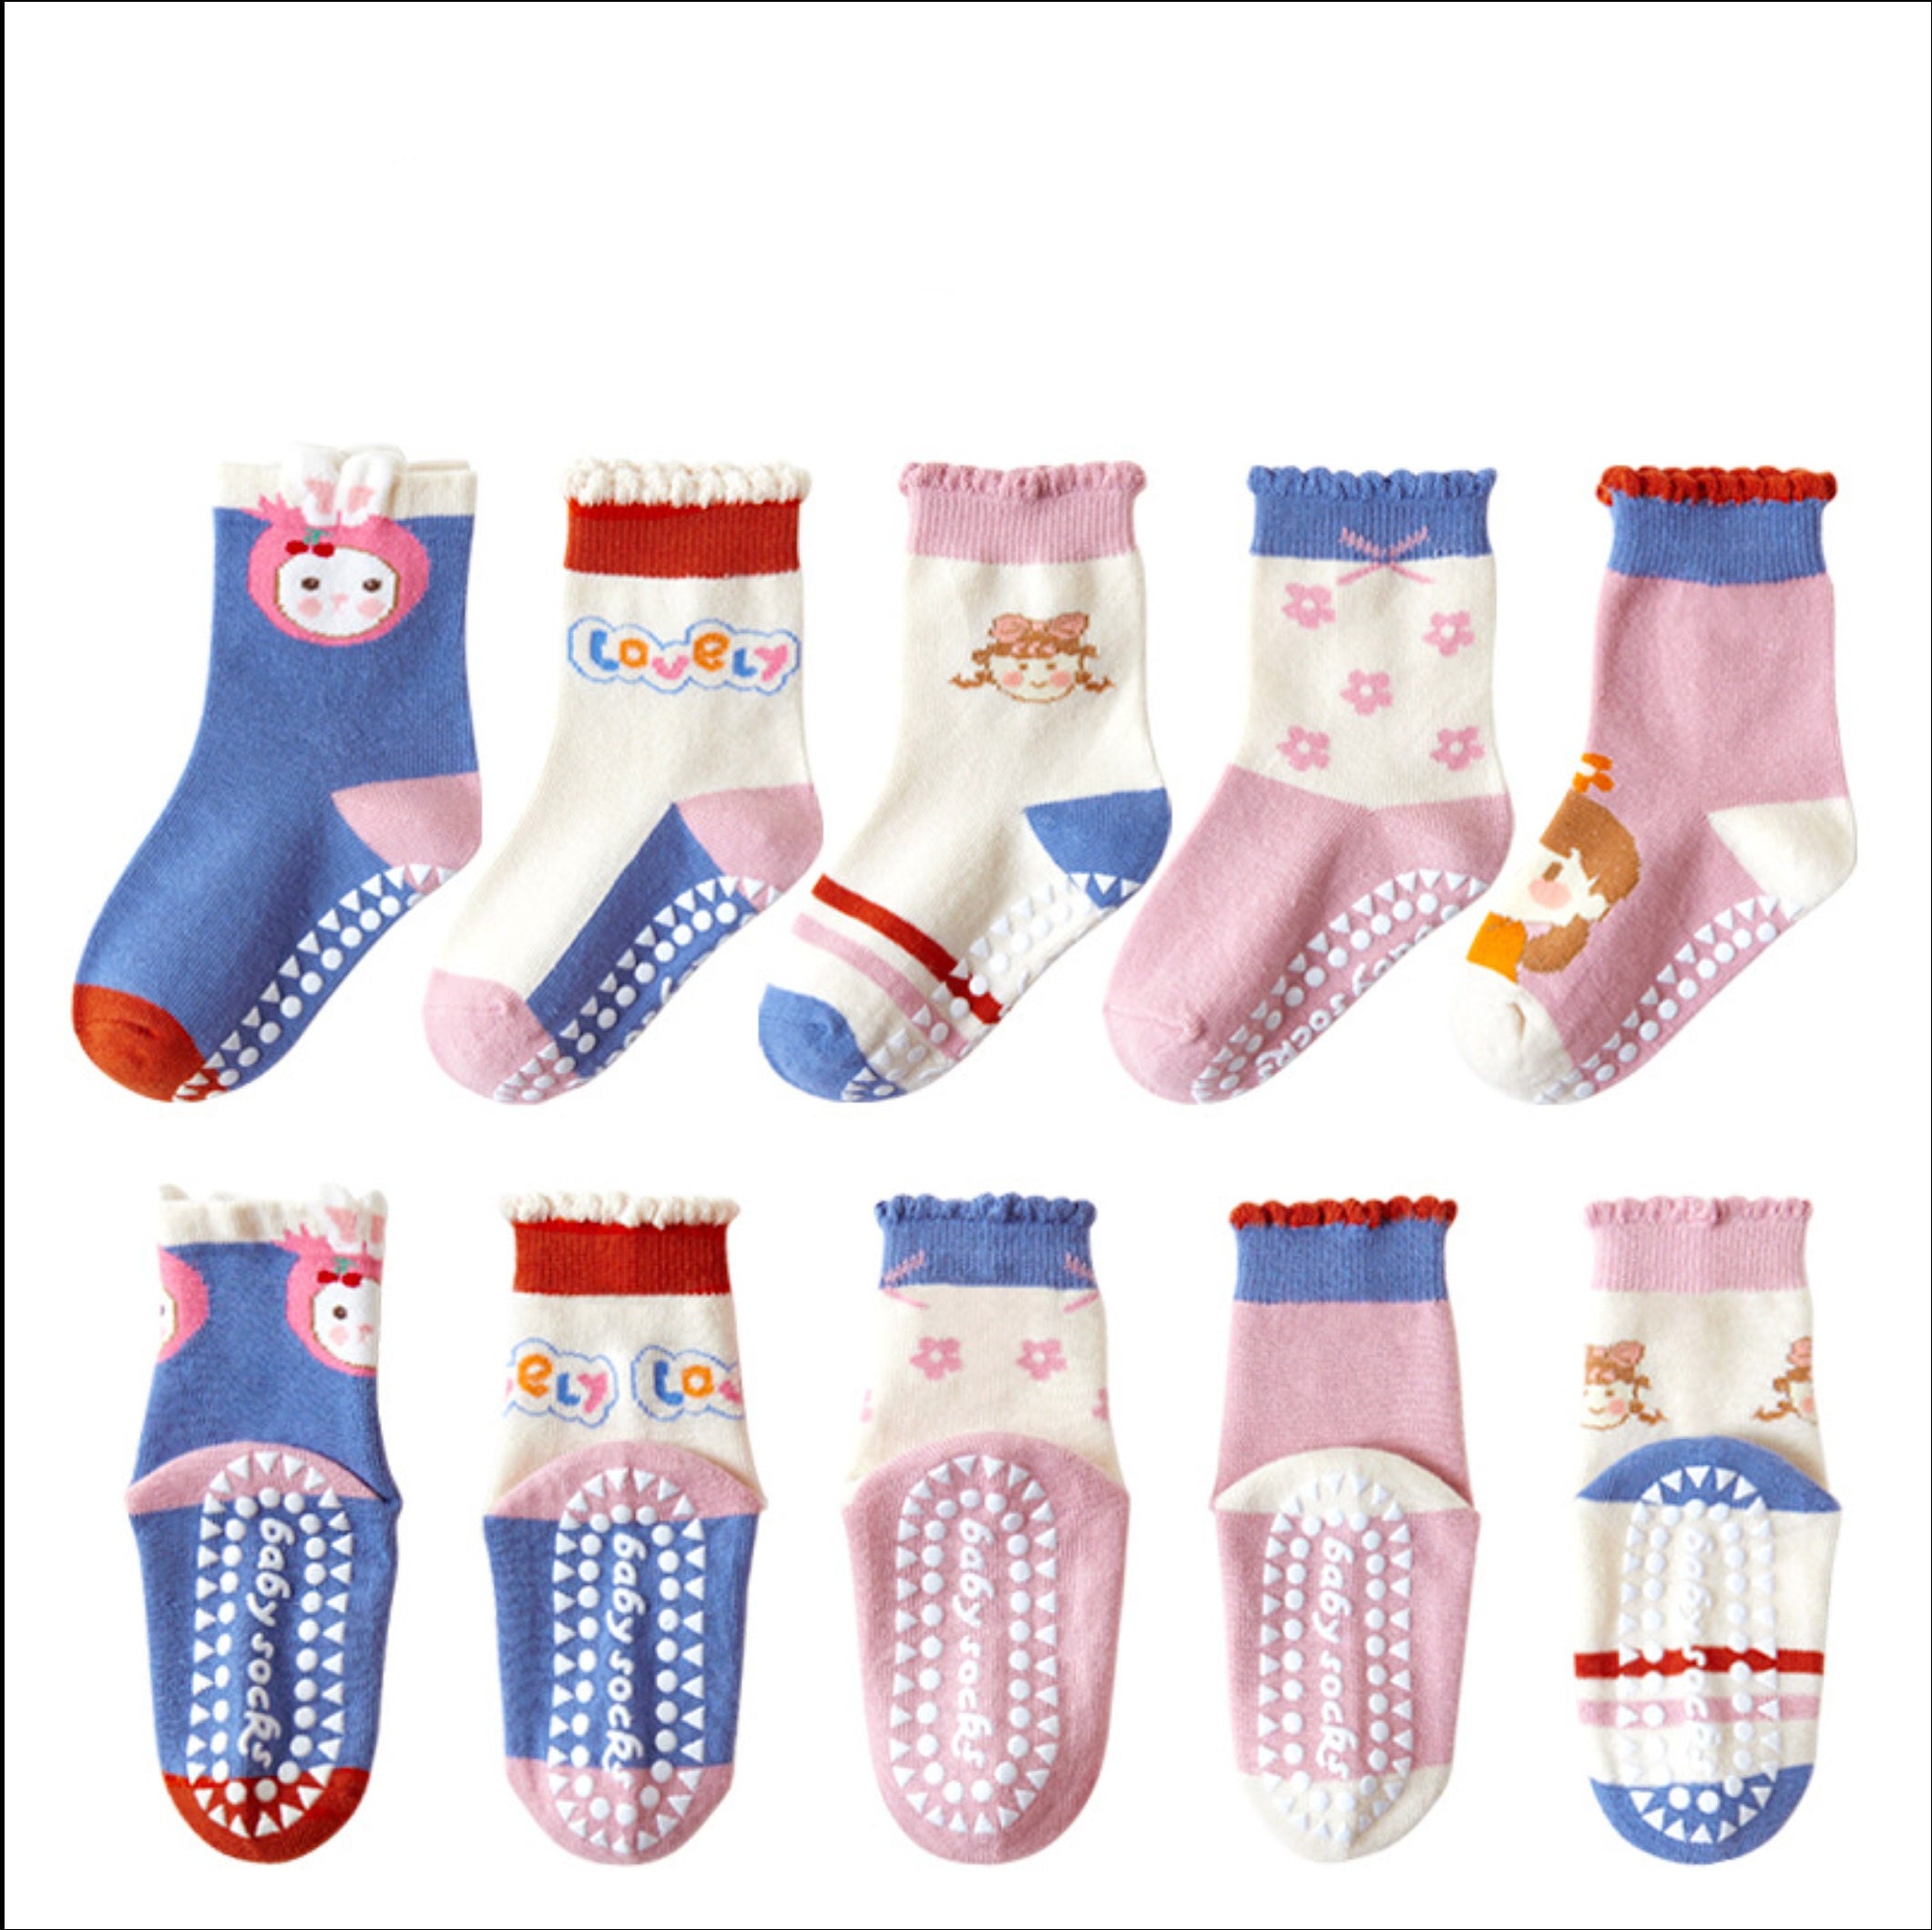 Simply Kids Toddler Socks with Grippers - Non Slip Baby Socks 6-12 12-24 Months 2T-3T Anti Slip Ankle Sock 0.5-1 Years